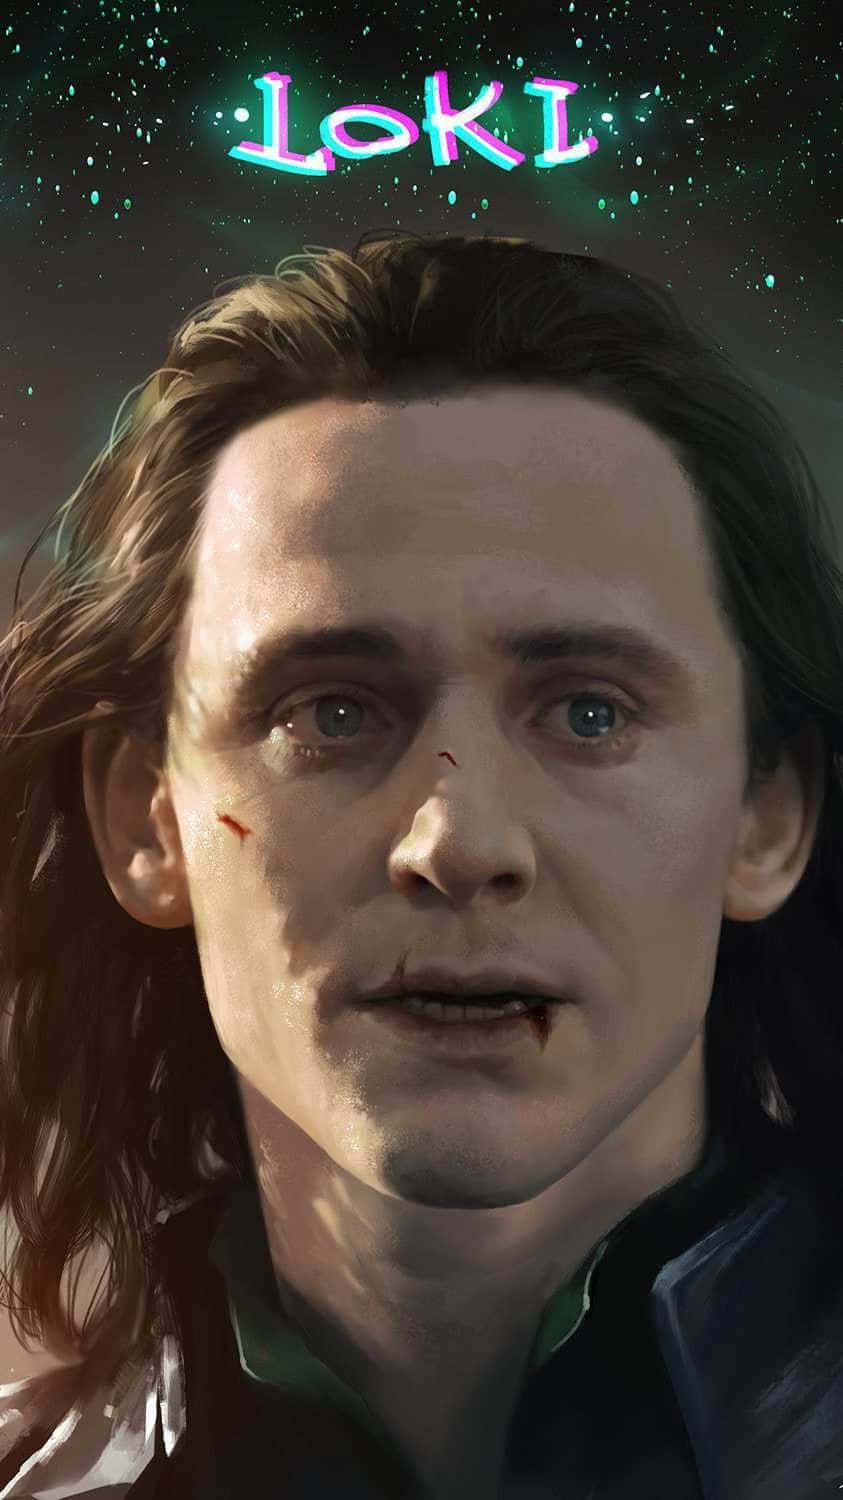 Add a dash of Marvel to your day with the Loki Iphone Wallpaper